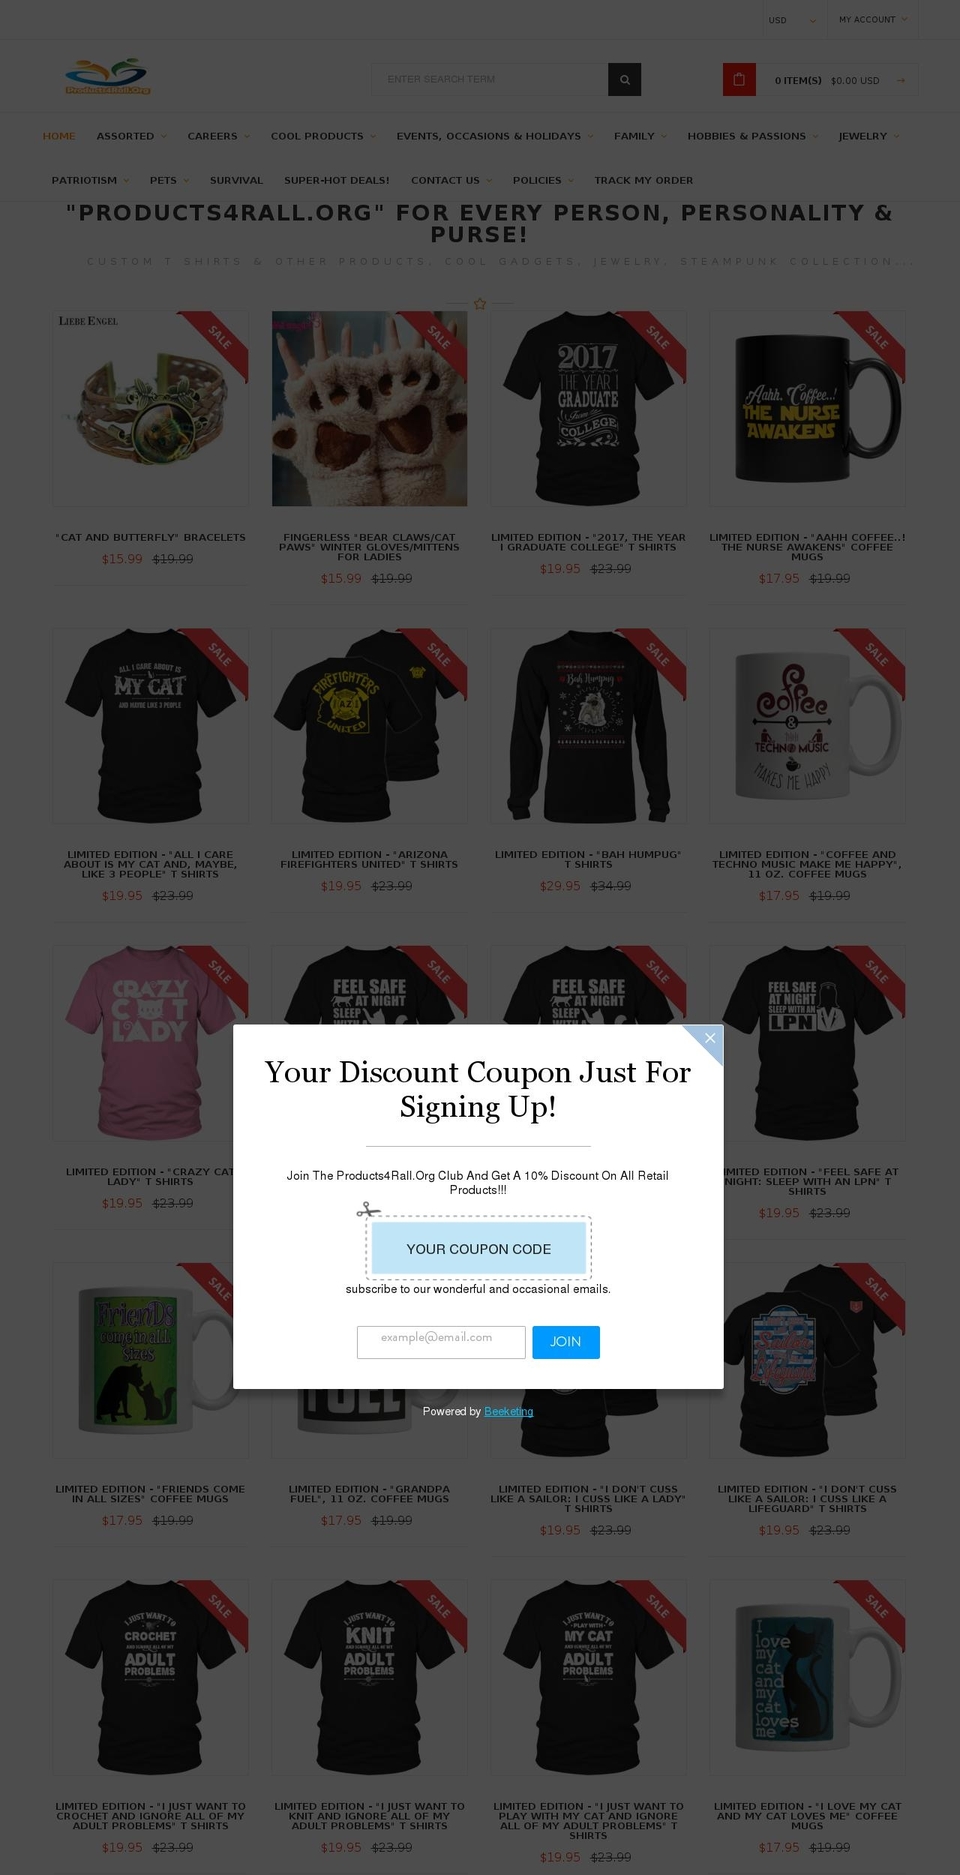 products4rall.org shopify website screenshot